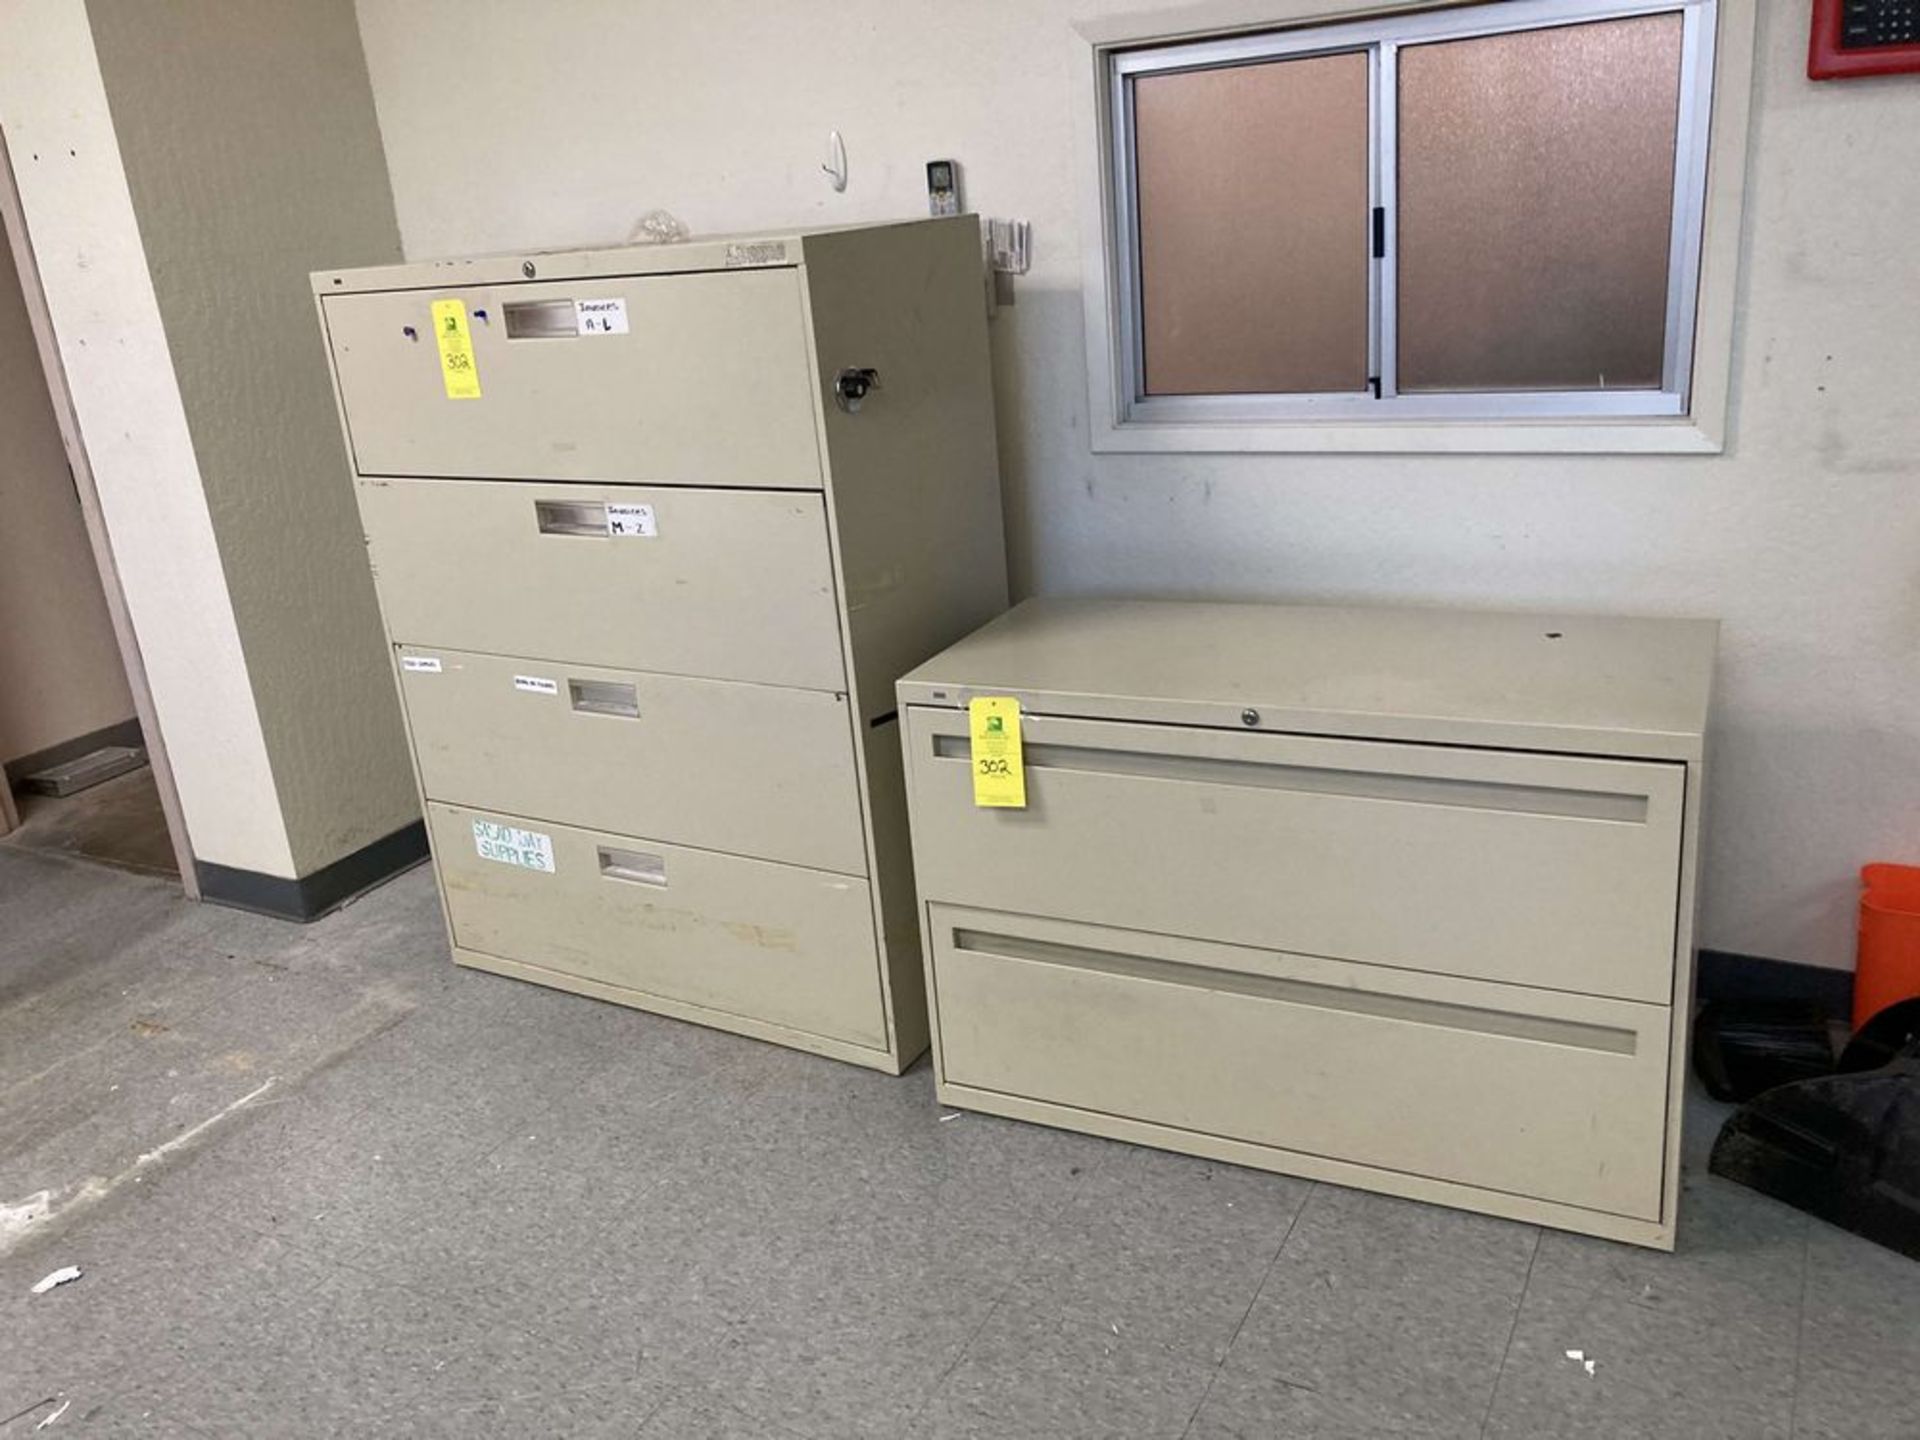 LOT of 2 metal construction file cabinet, 42 in w x 18in d x 51 in hgt and 42 in w x 19 in d x 29 in